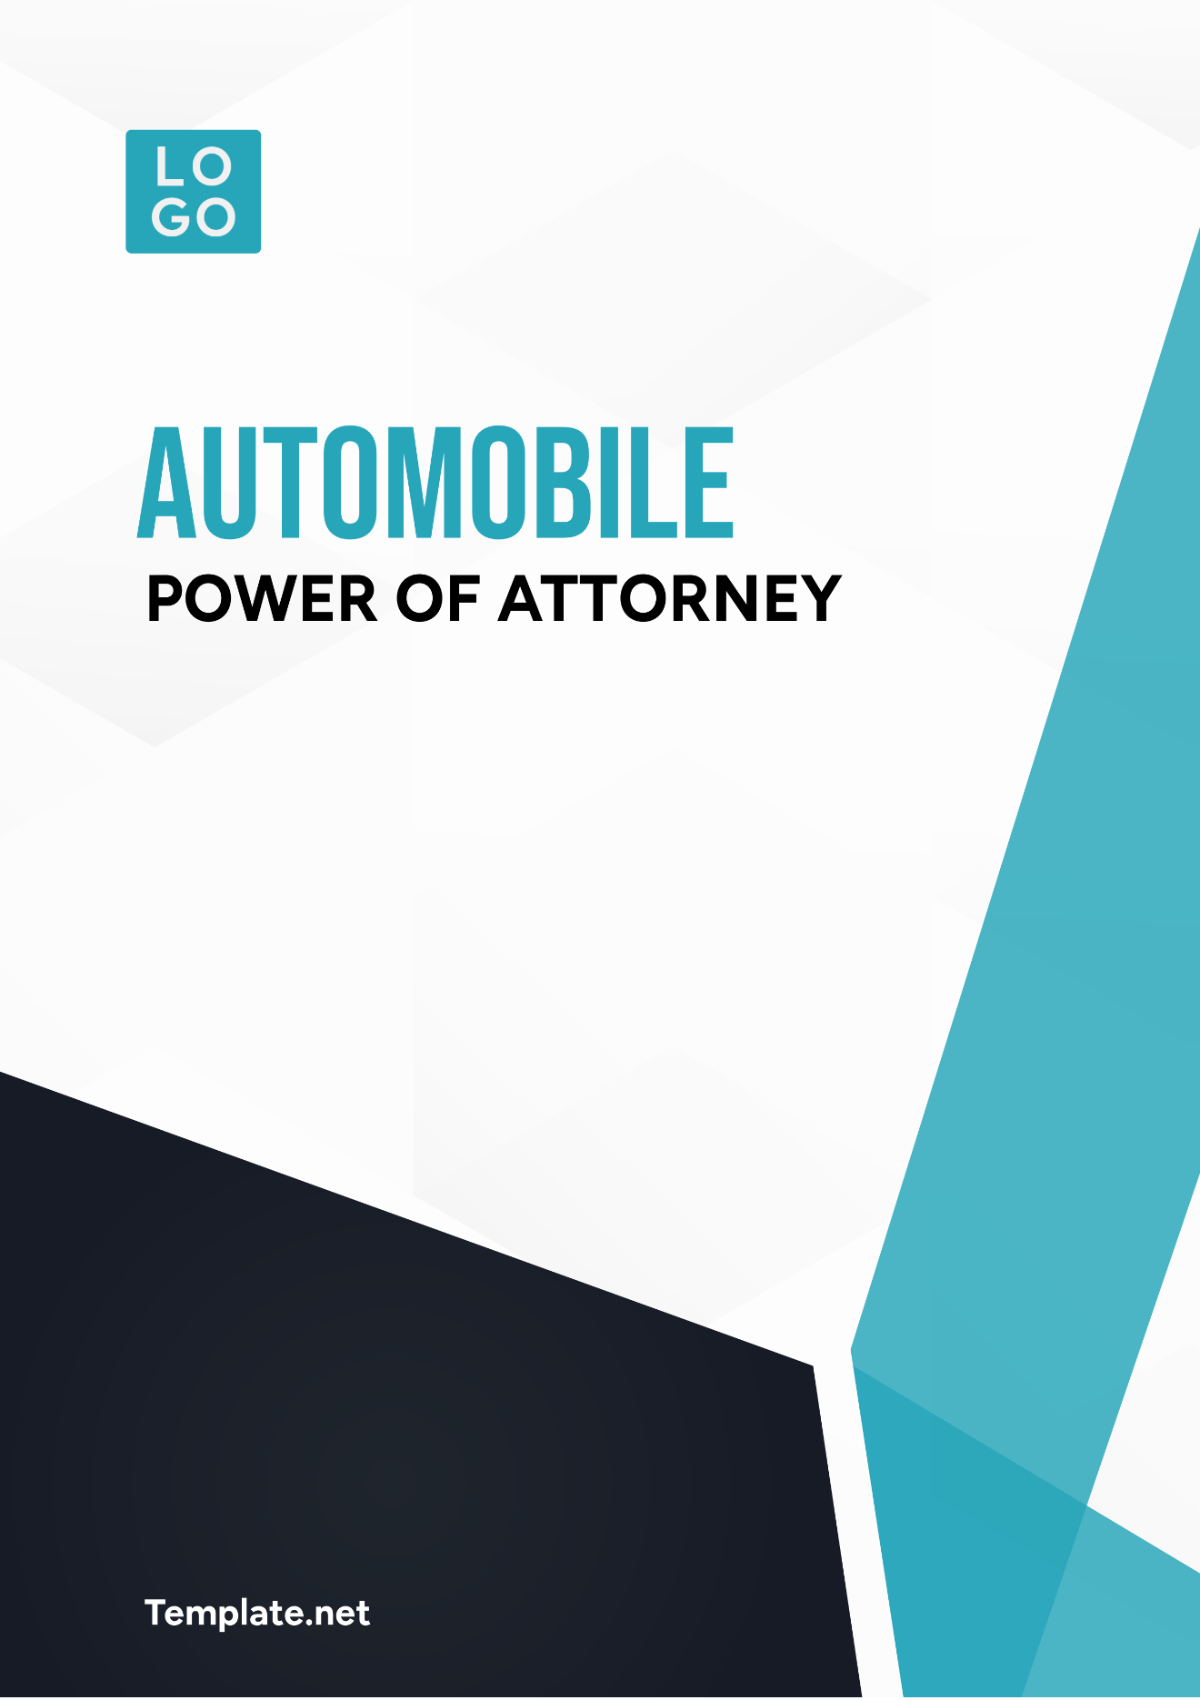 Automobile Power of Attorney Template